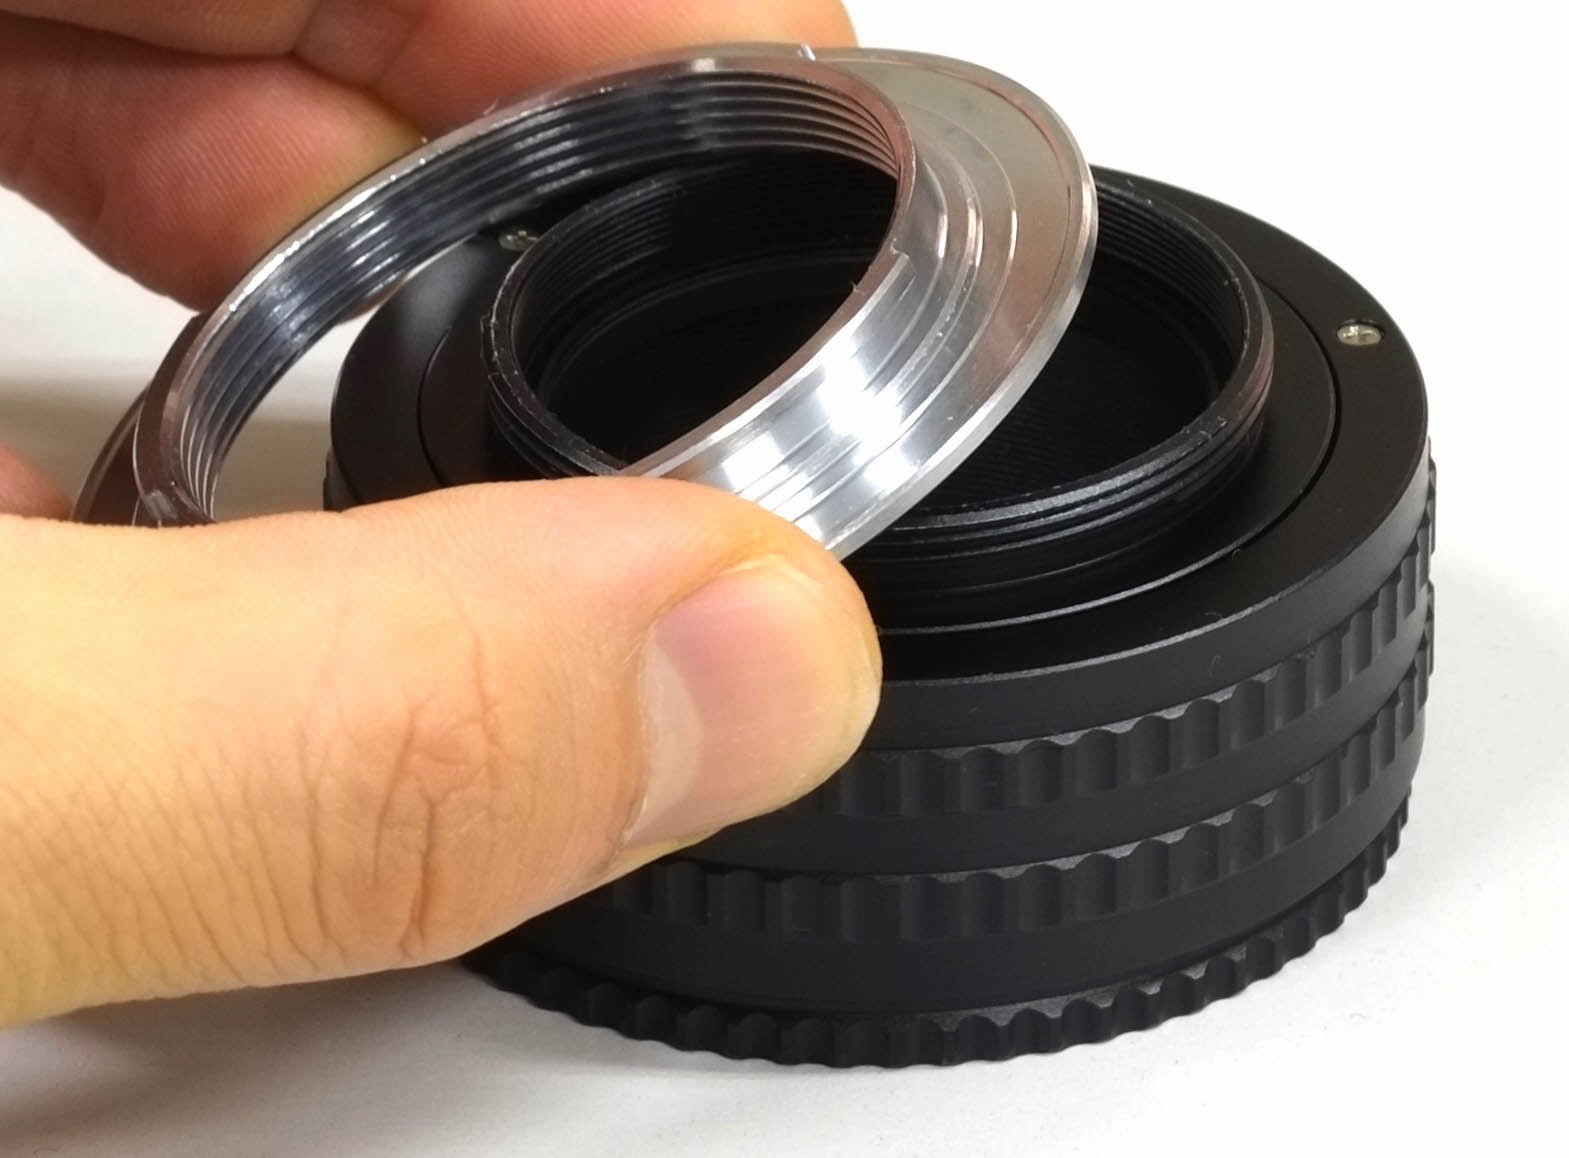 M42 MOUNT SPIRAL: Camera Mount for ﻿Helicoid Tube(CMHT) and